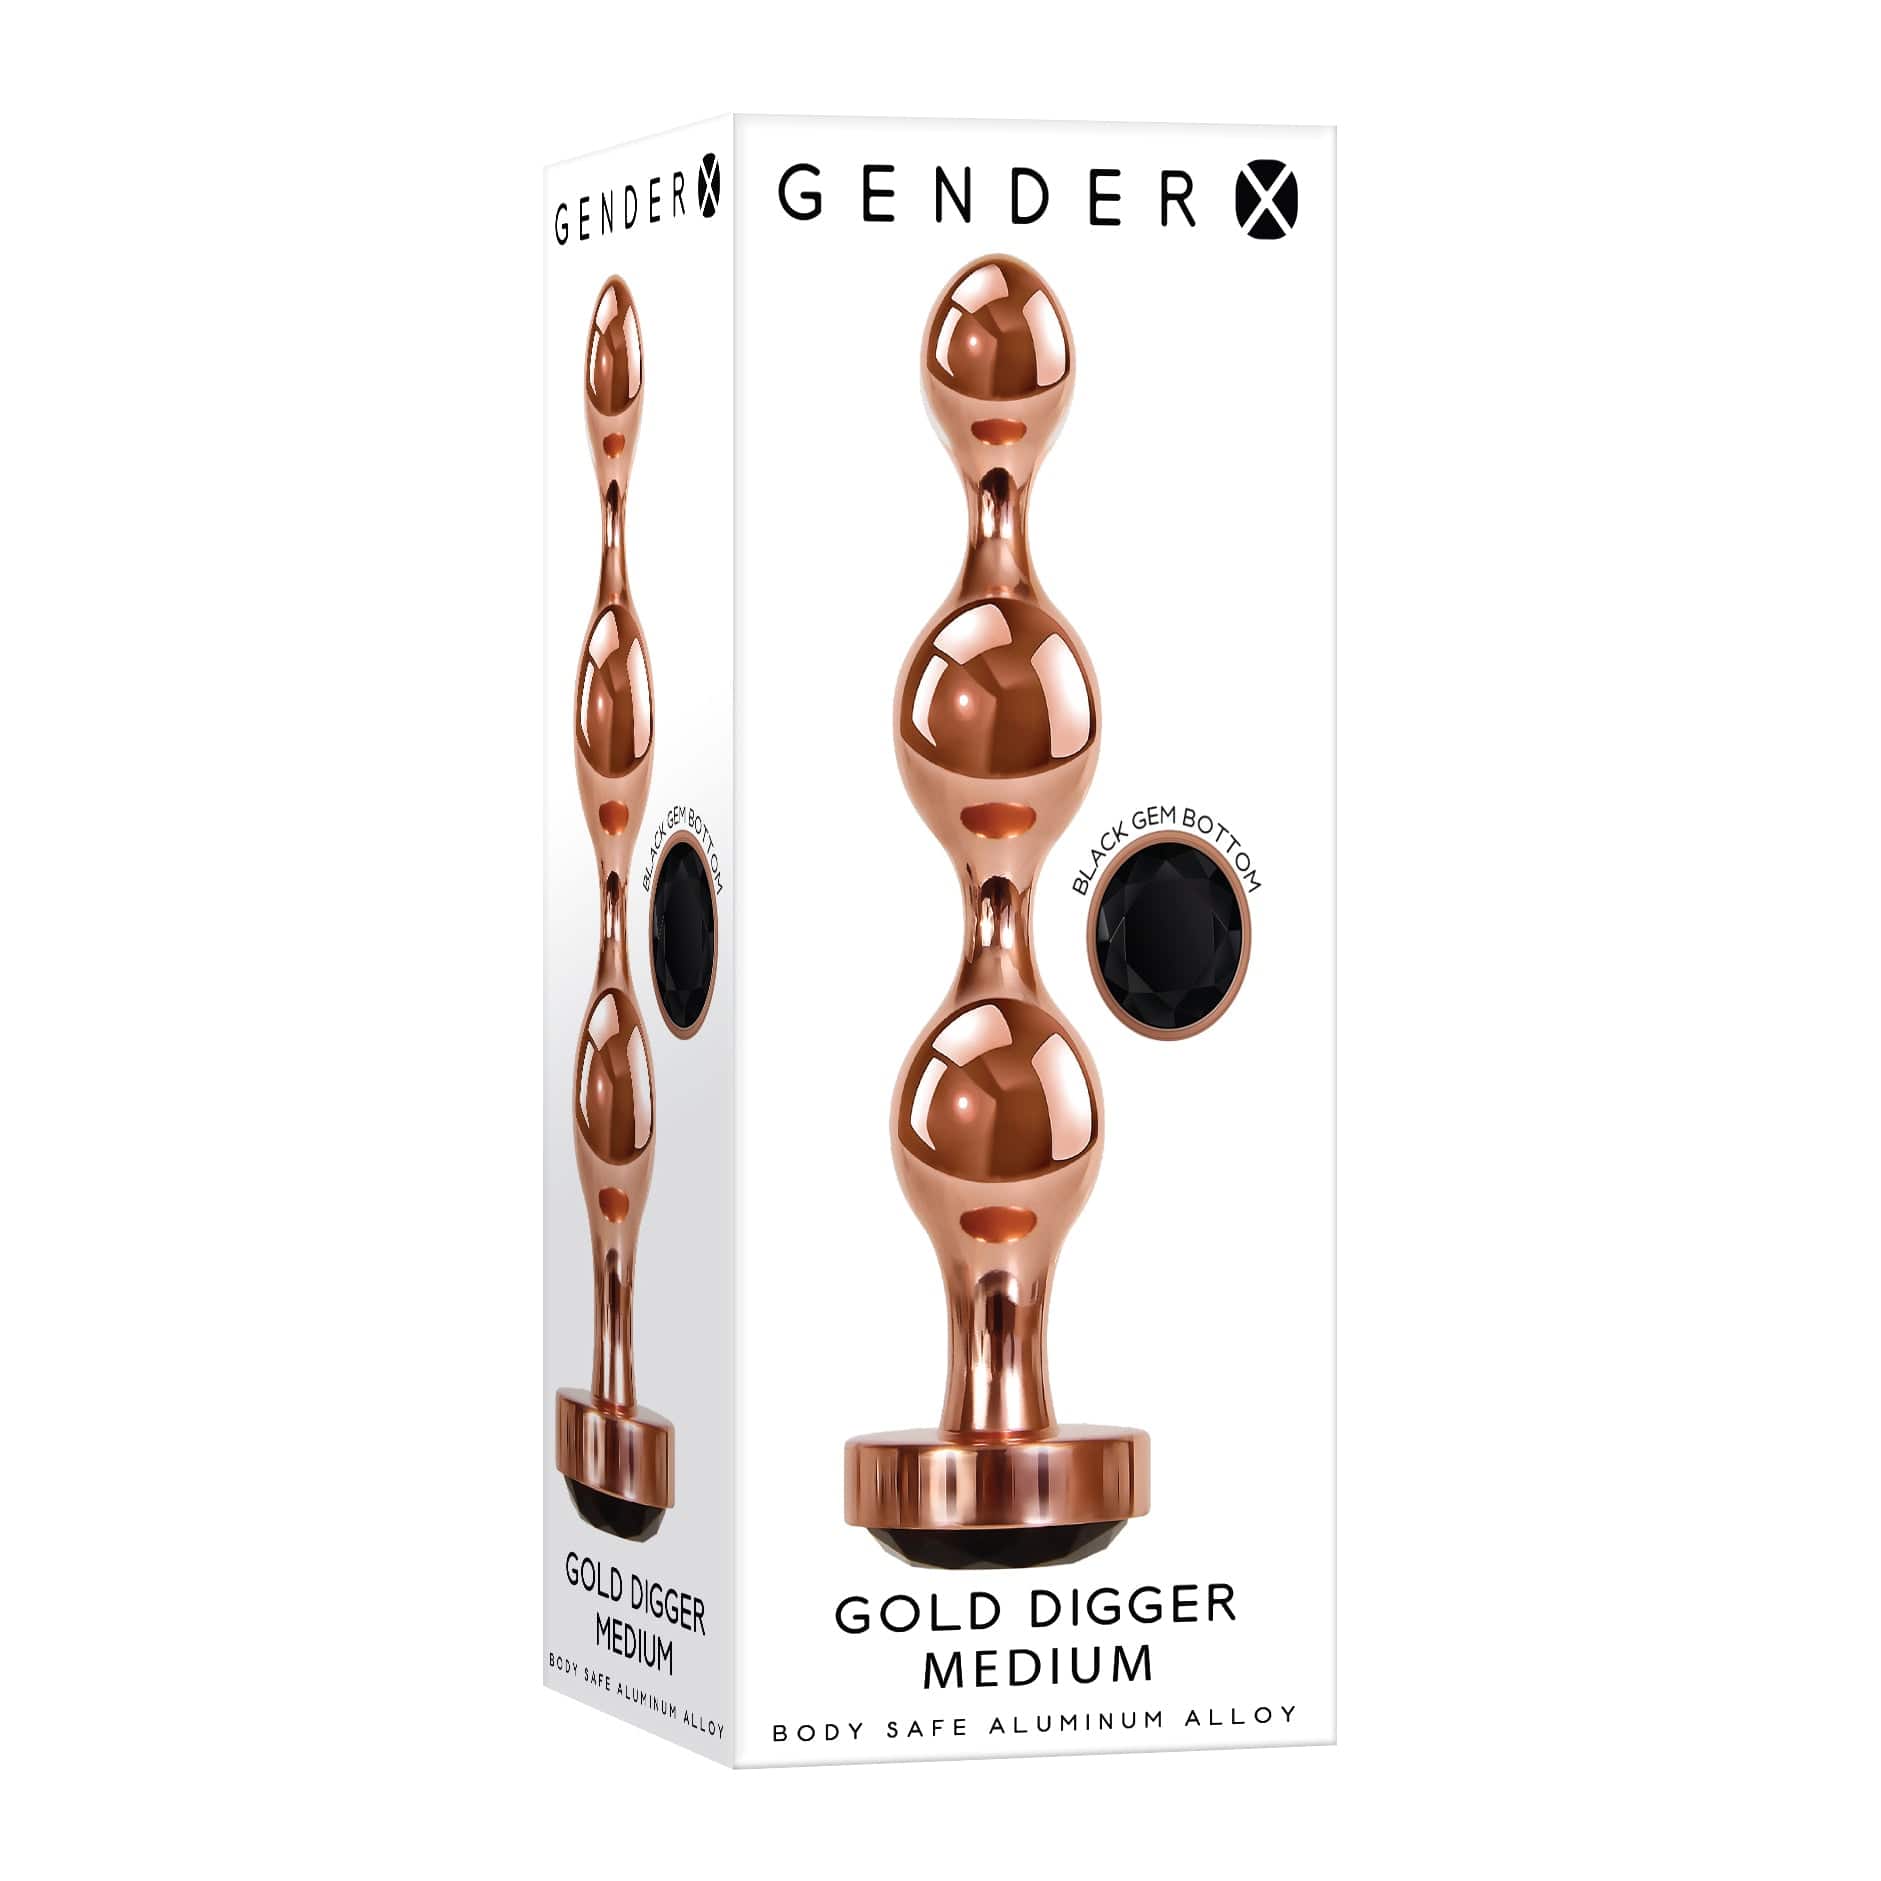 Evolved - Gender X Gold Digger Anal Beads Medium (Gold) -  Anal Beads (Non Vibration)  Durio.sg